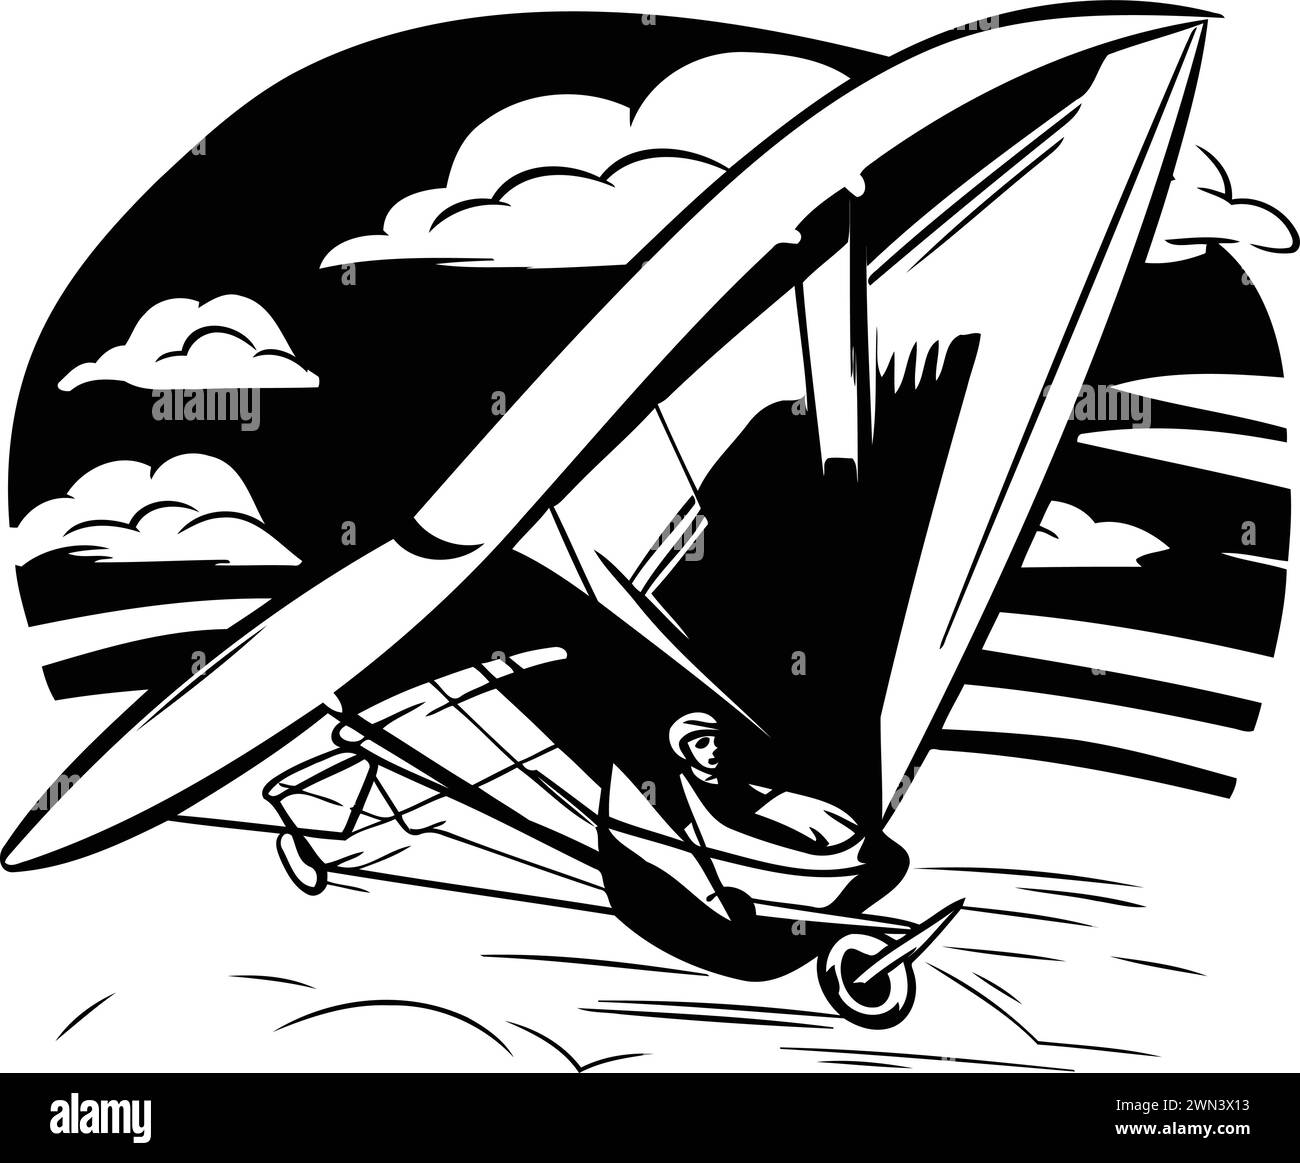 Hang glider flying in the sky. Black and white vector illustration. Stock Vector